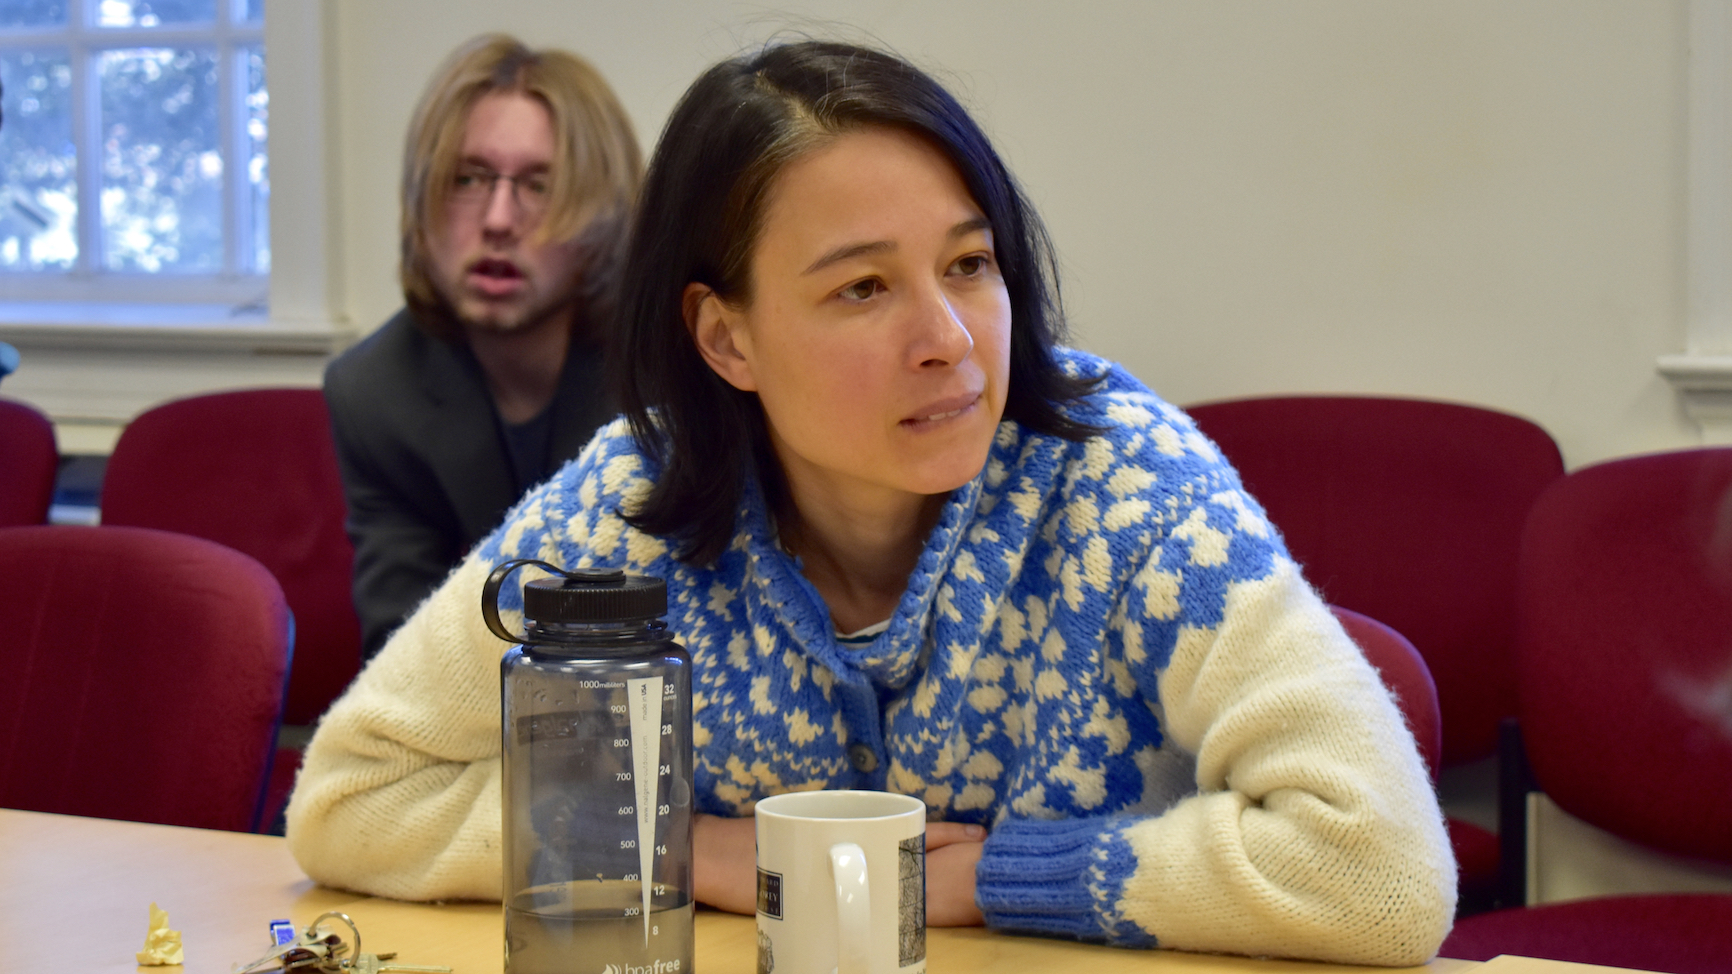 Professor Valentine Hacquard in a ski sweater, arms resting folded on a conference room table, looking off to the right